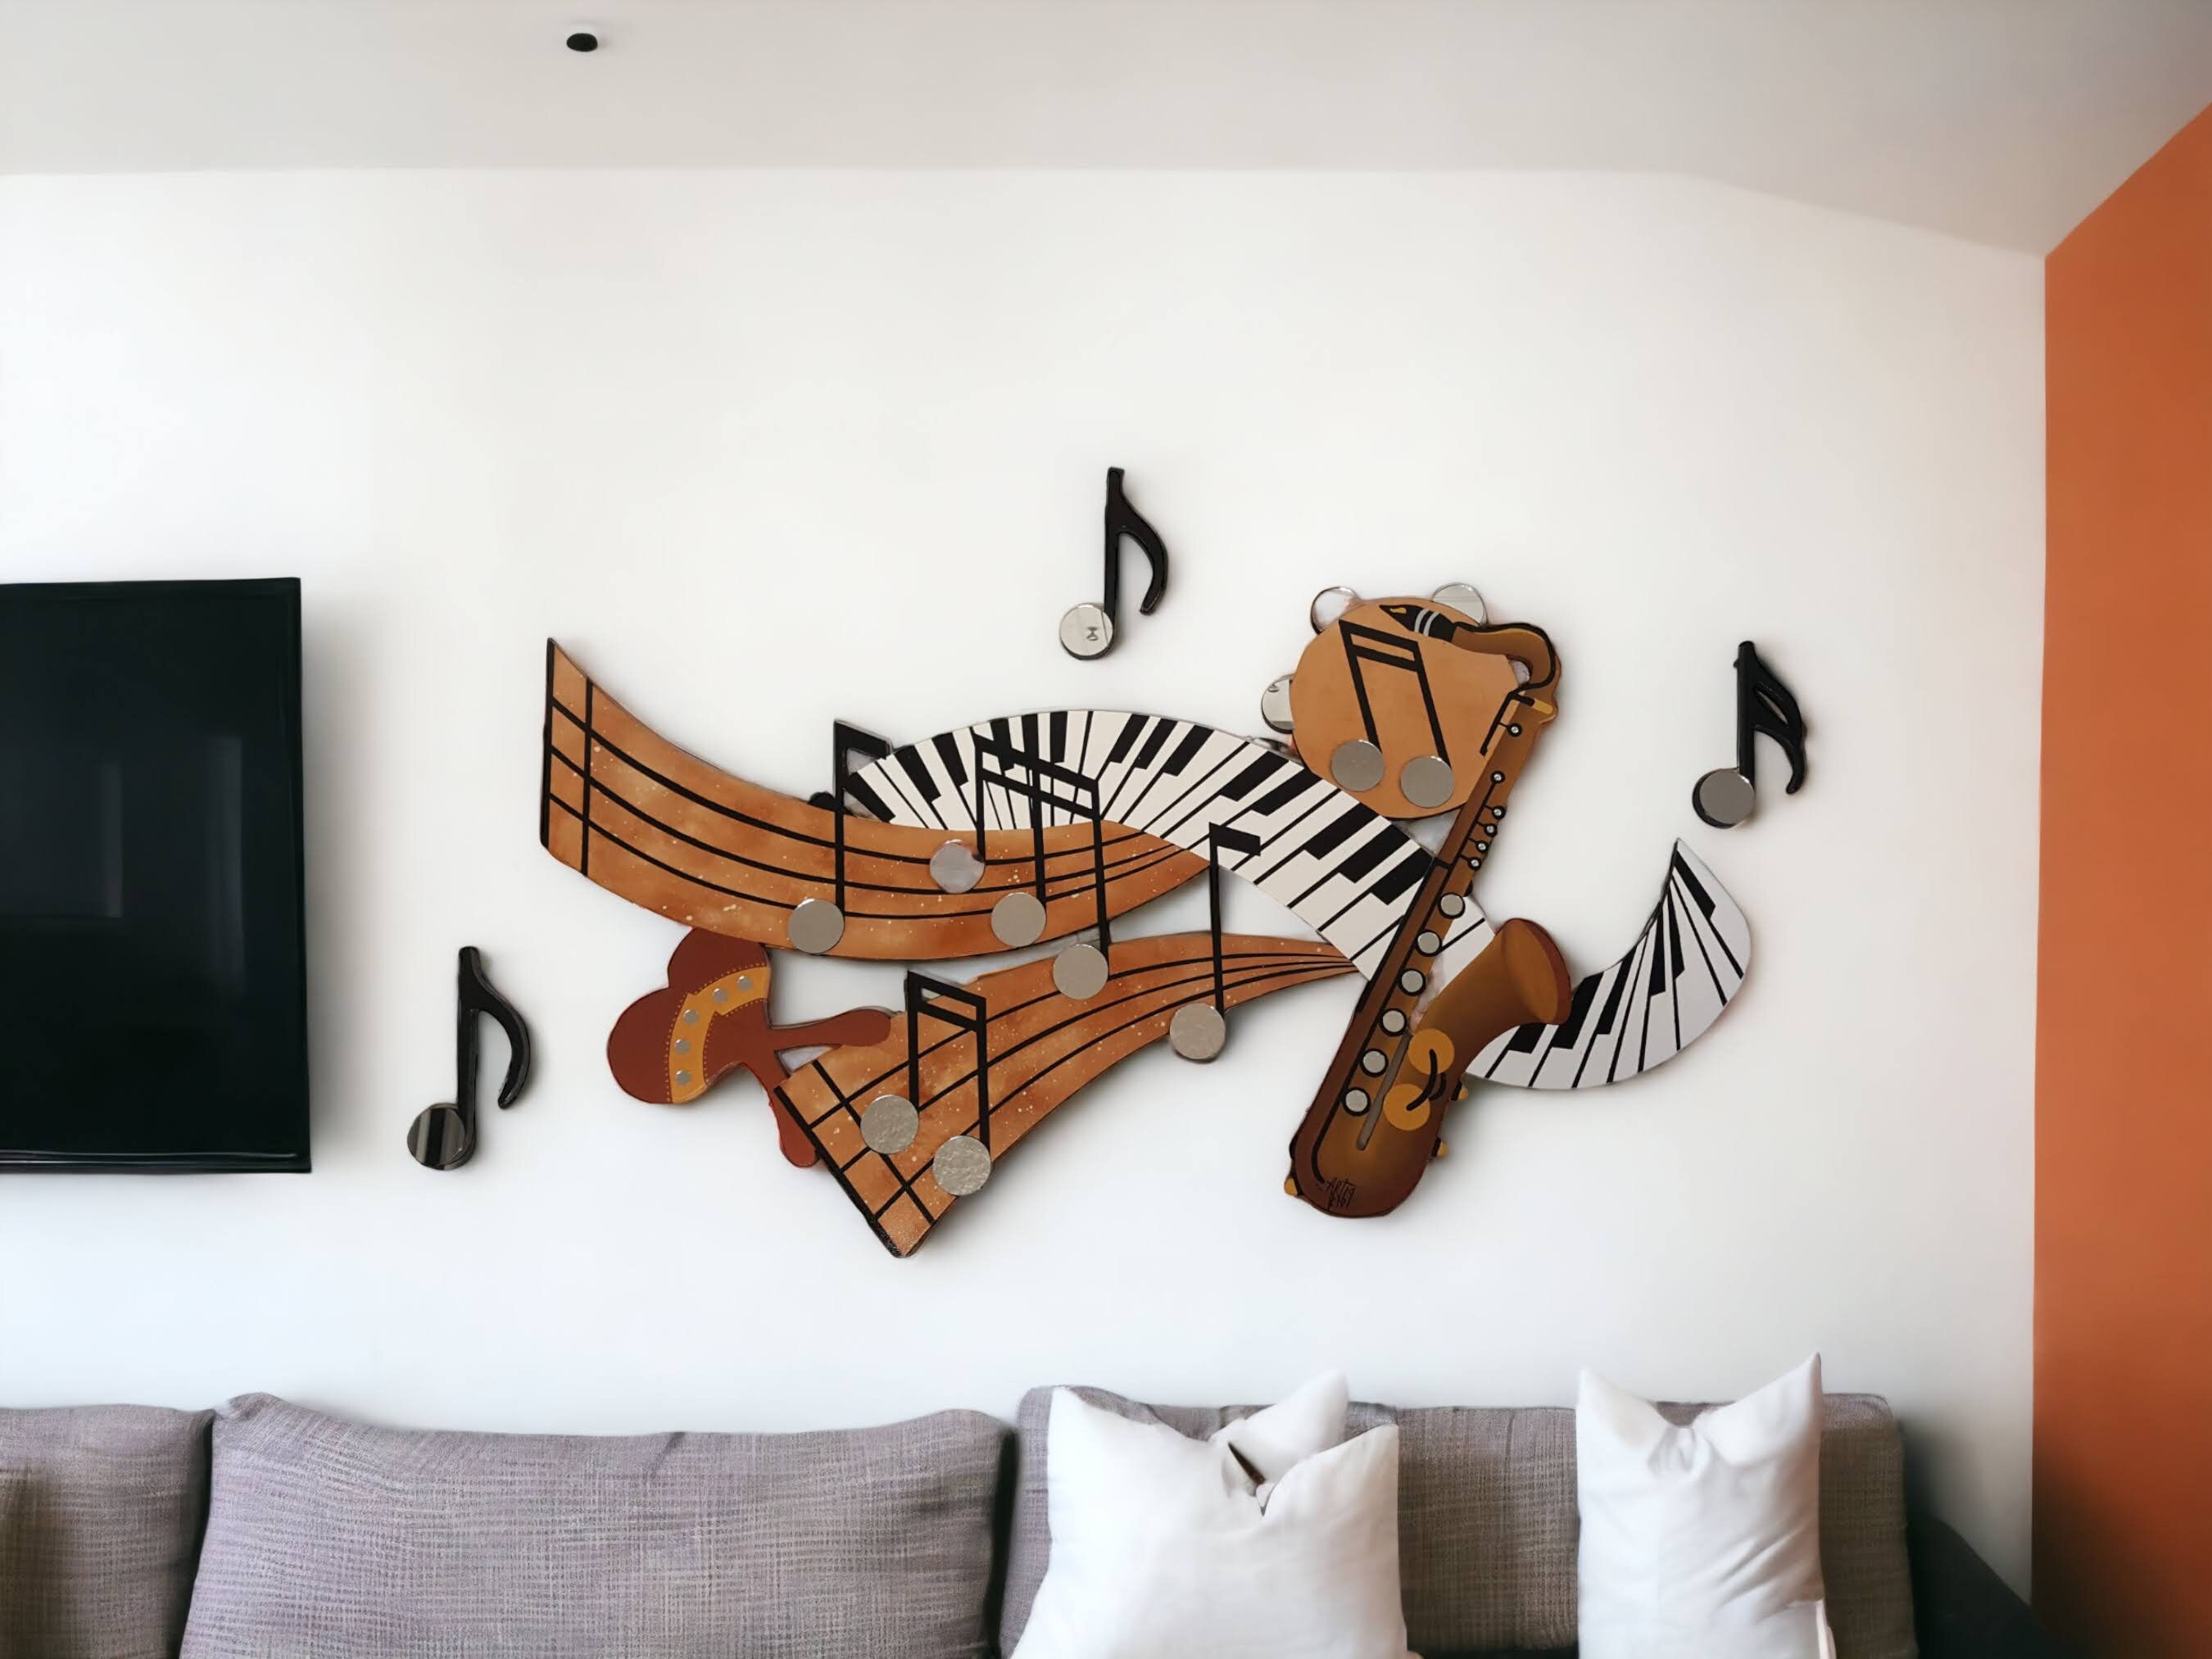 Review: Best Music-Themed Wall Art for Your Home